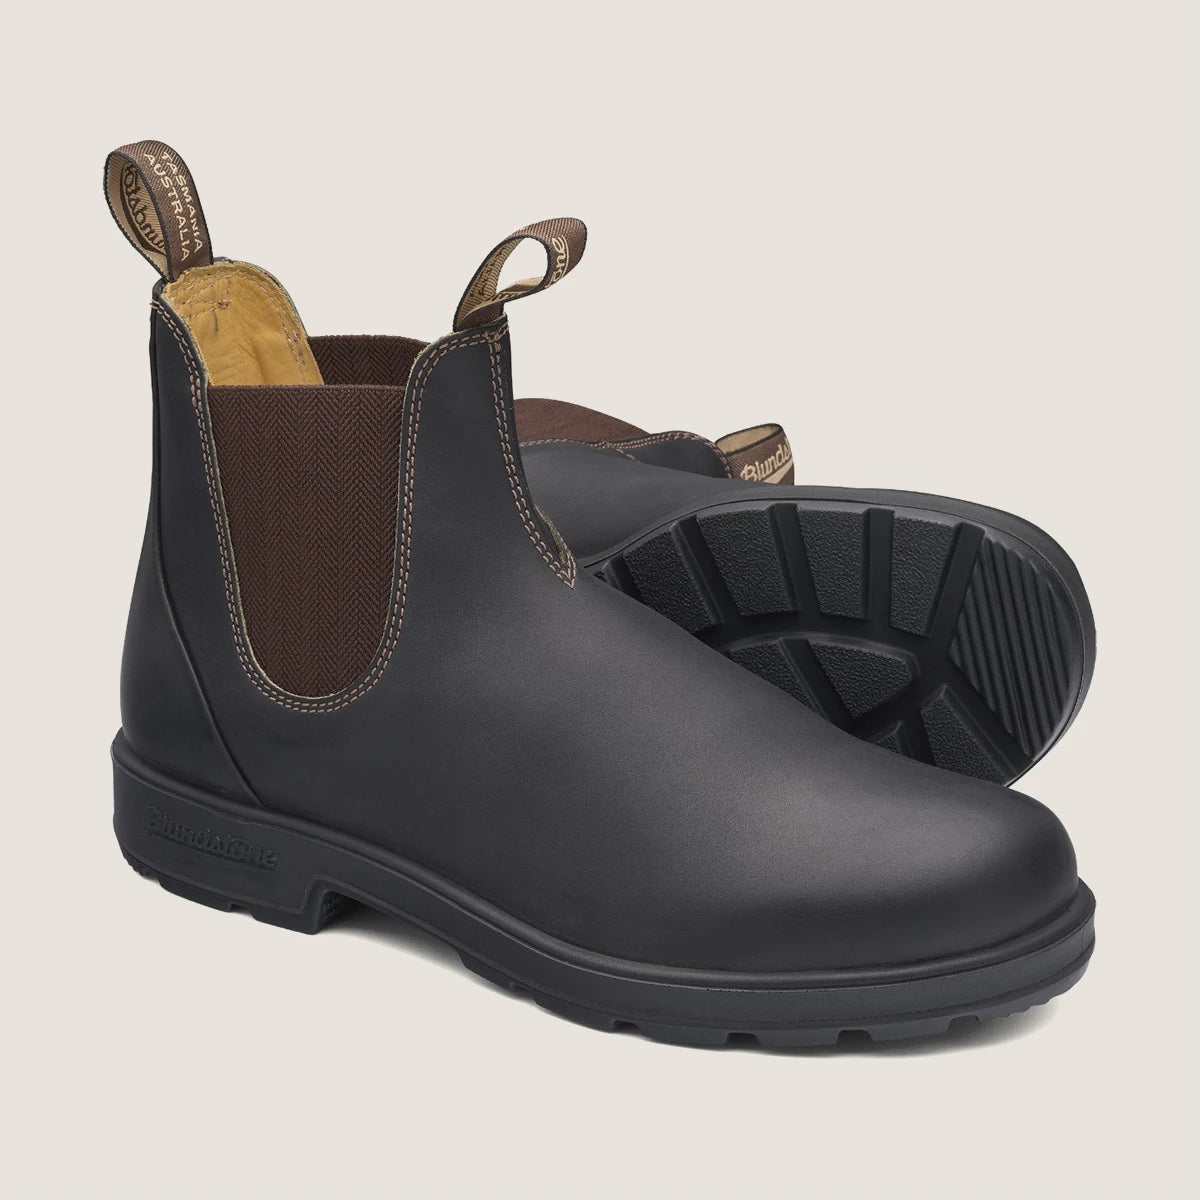 Blundstone 600 Elastic Sided Work Boots in Brown